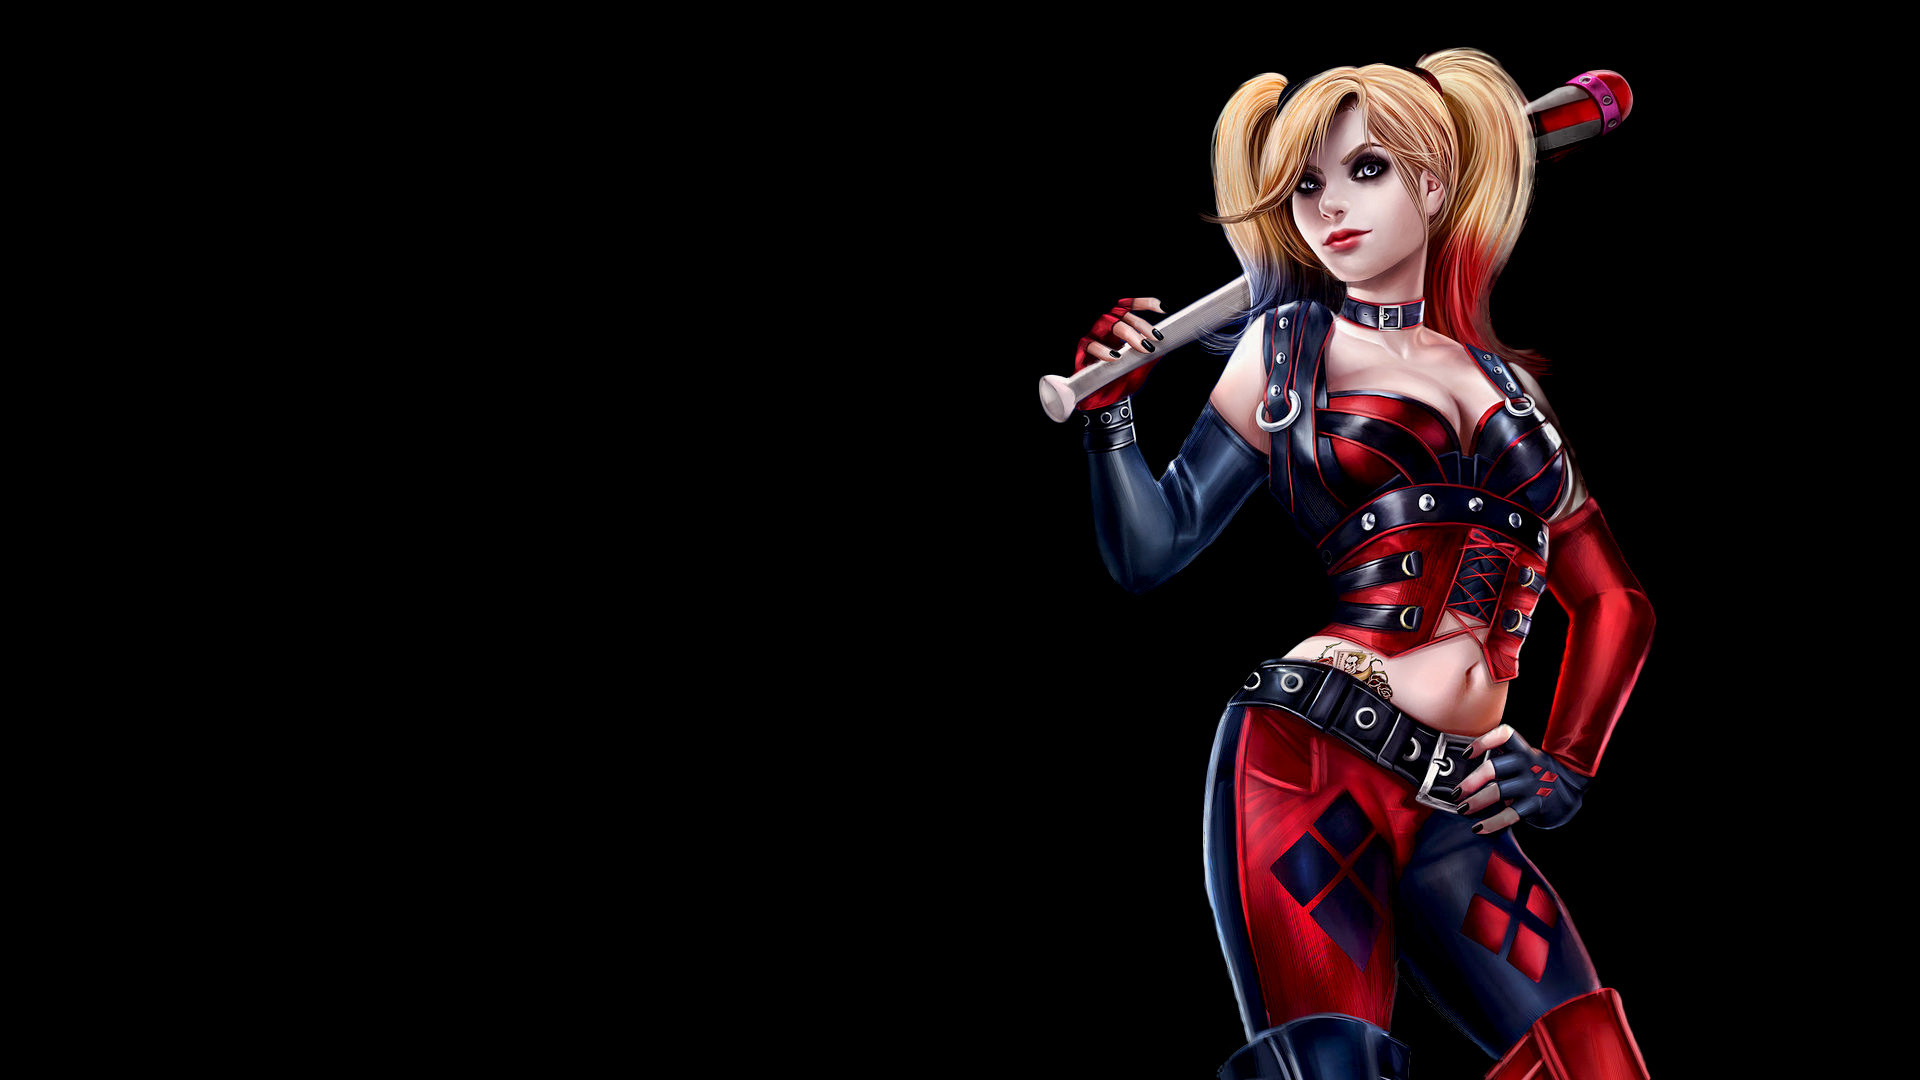 1920x1080 Collection of Harley Quinn Background on HDWallpapers